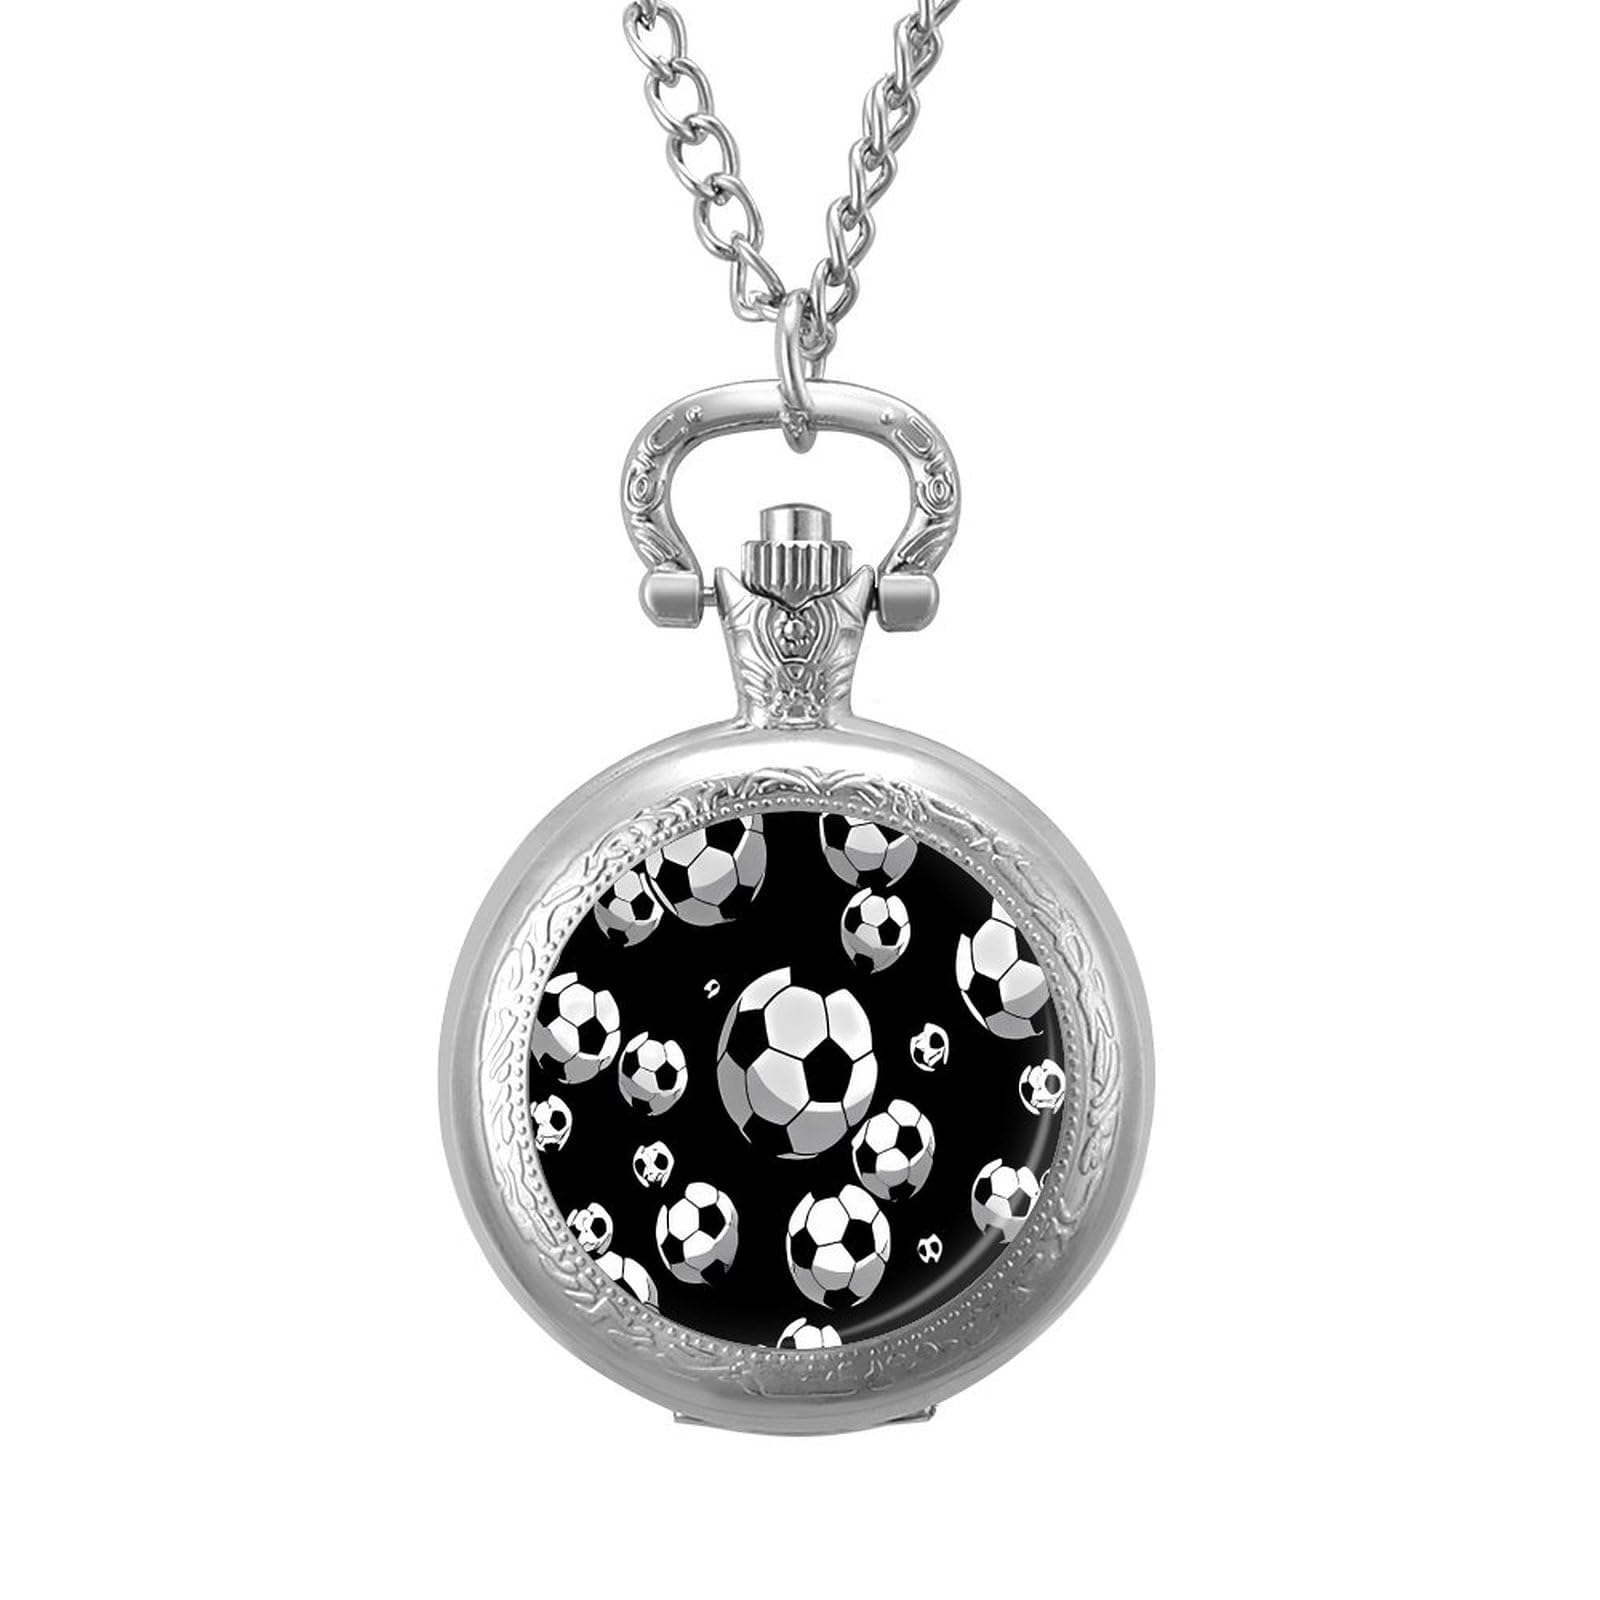 Holiday Soccer Vintage Pocket Watch Arabic Numerals Scale Quartz with Chain Christmas Birthday Gifts